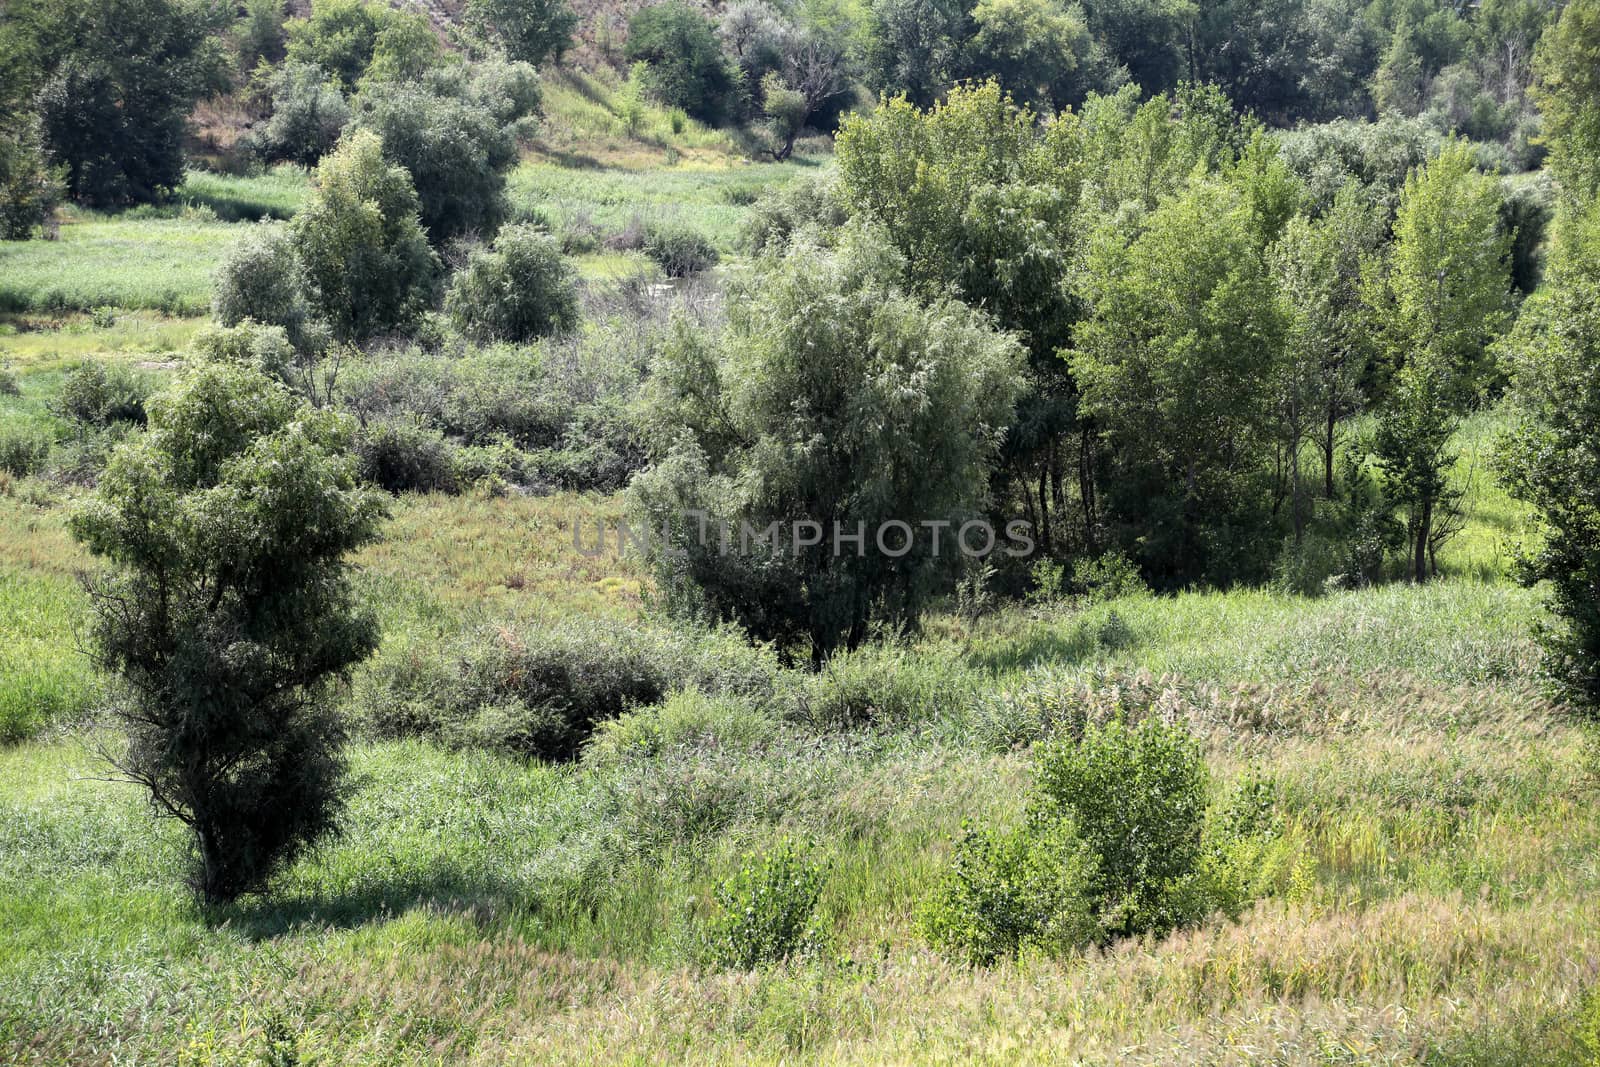 tree and wild grasses in hilly scenic landscape